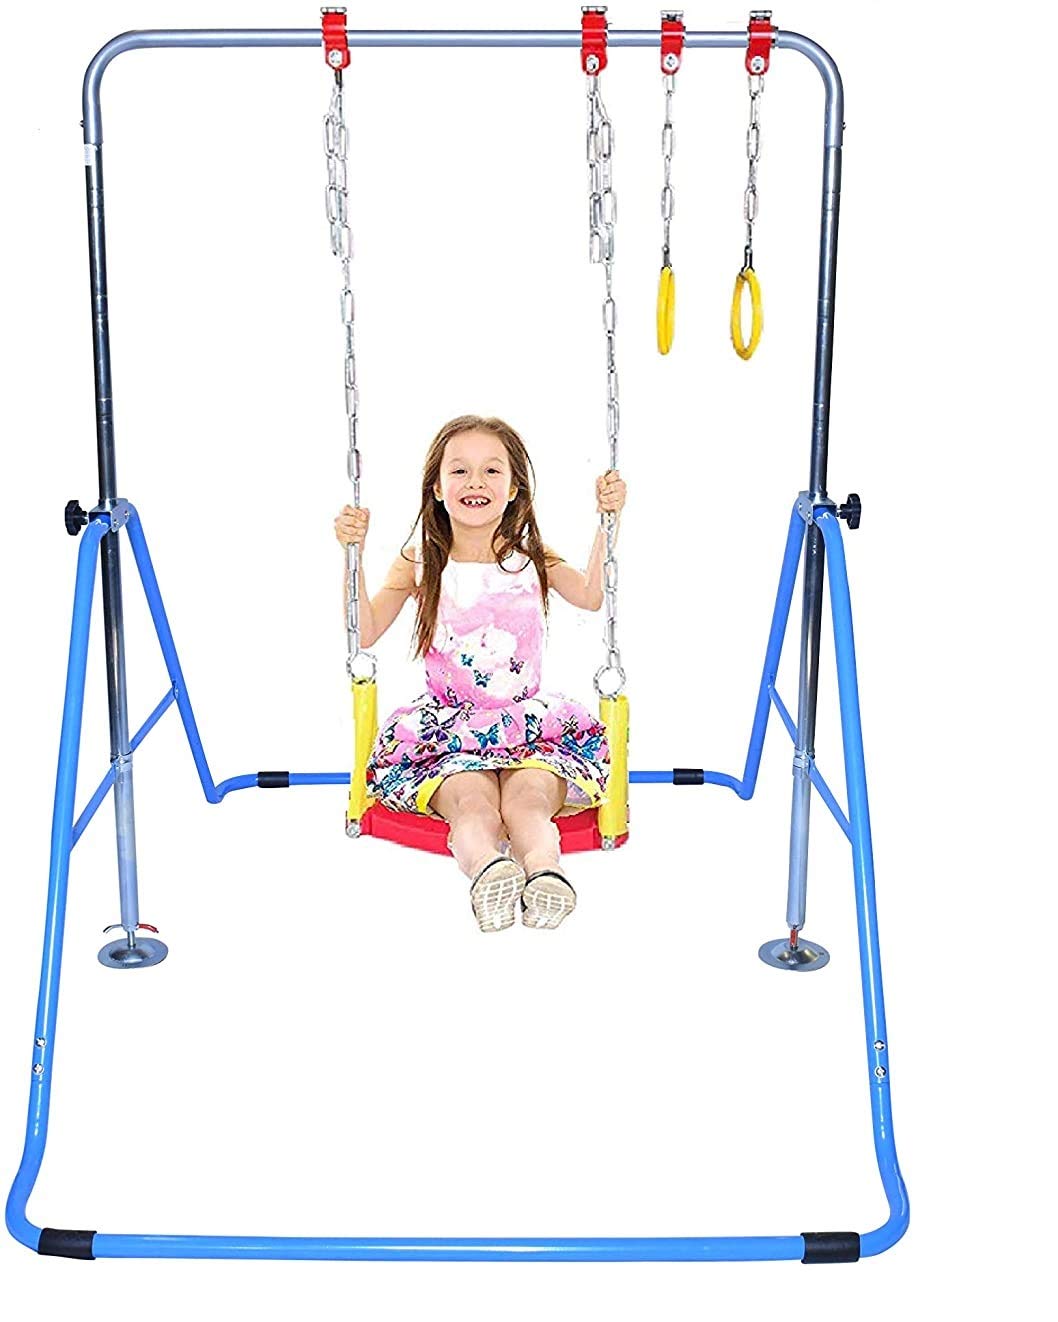 Athletic Bar Kids Home gymnastics Bar Jungle gym 3 in 1 Set Deluxe Swing Seat, Trapeze Rings, Horizontal Kip Bar Height Adjustable Mo